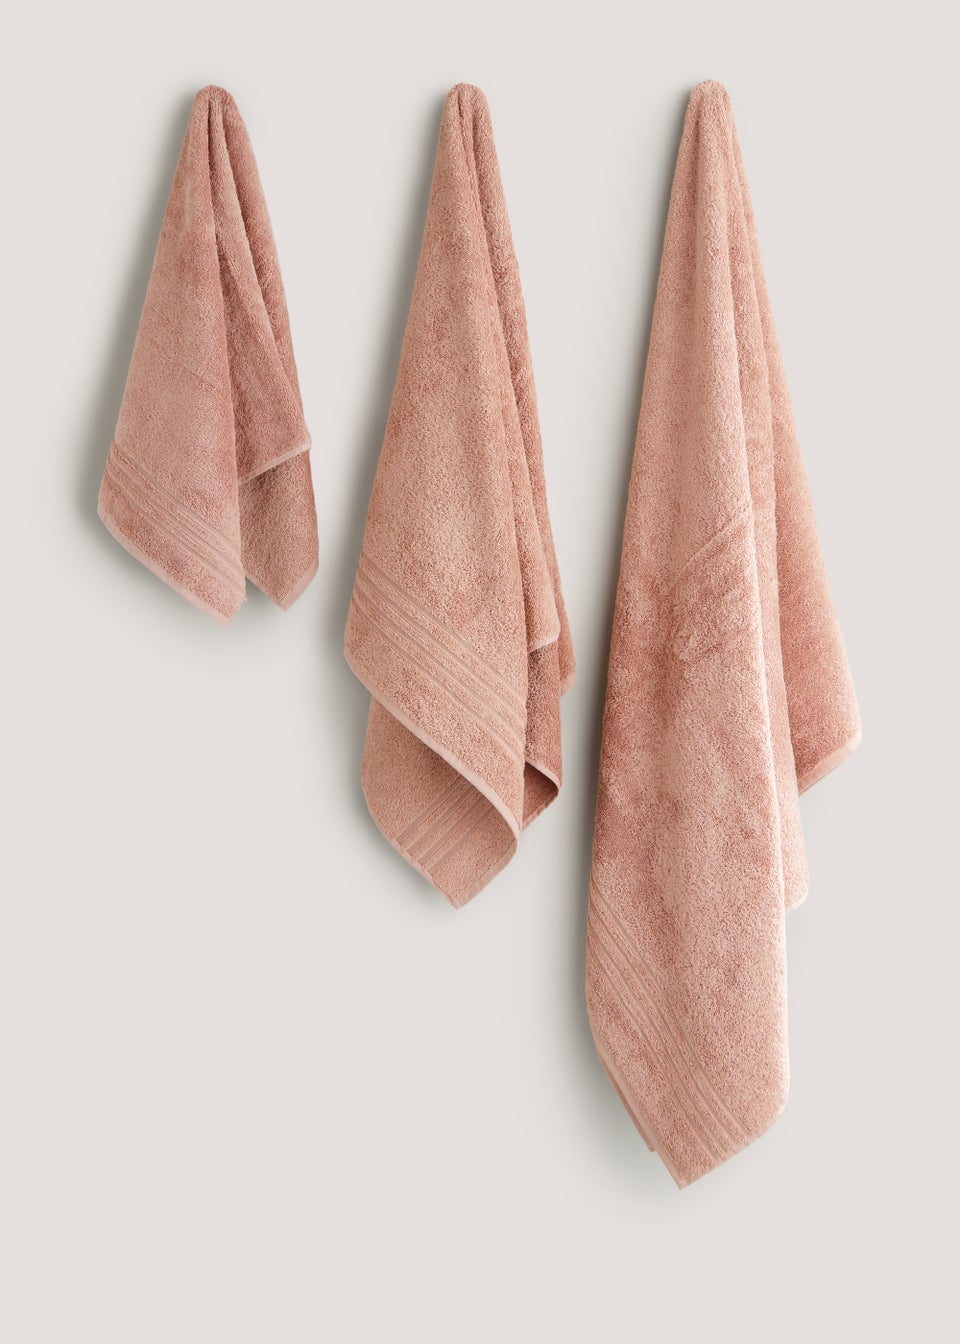 Dusky Pink 100% Egyptian Cotton Towels